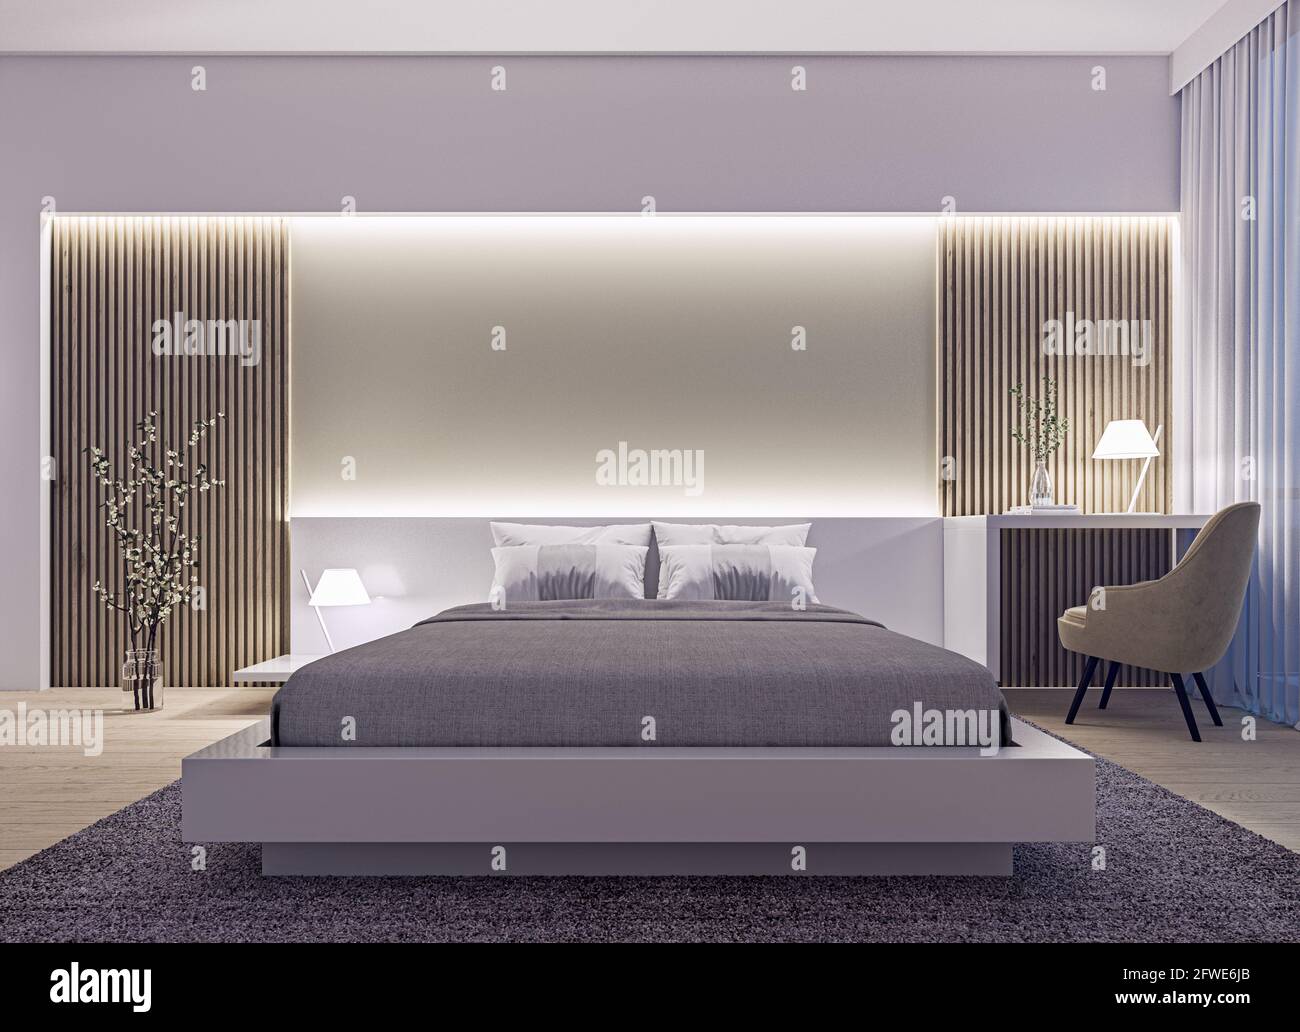 Modern interior design of spacious luxury bedroom with wood slat wall and accent lighting at night, 3d rendering, 3d illustration Stock Photo